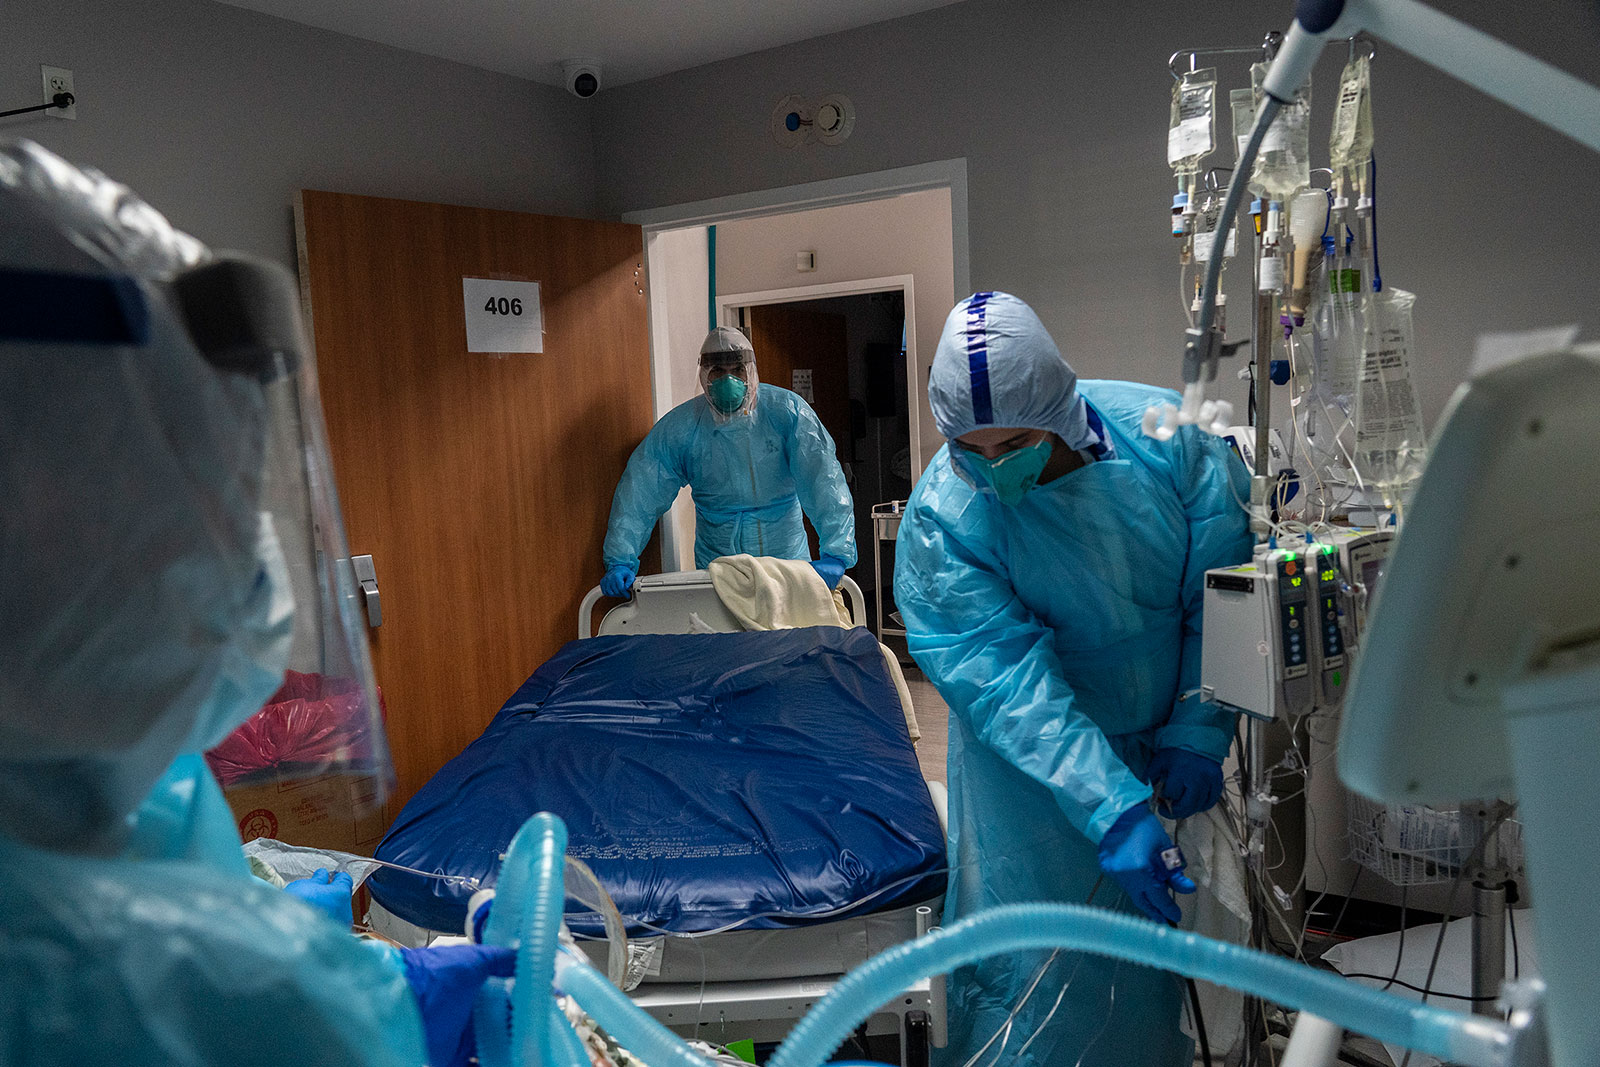 Medical staff treat a Covid-19 patient in the intensive care unit at United Memorial Medical Center in Houston, Texas, on November 19.